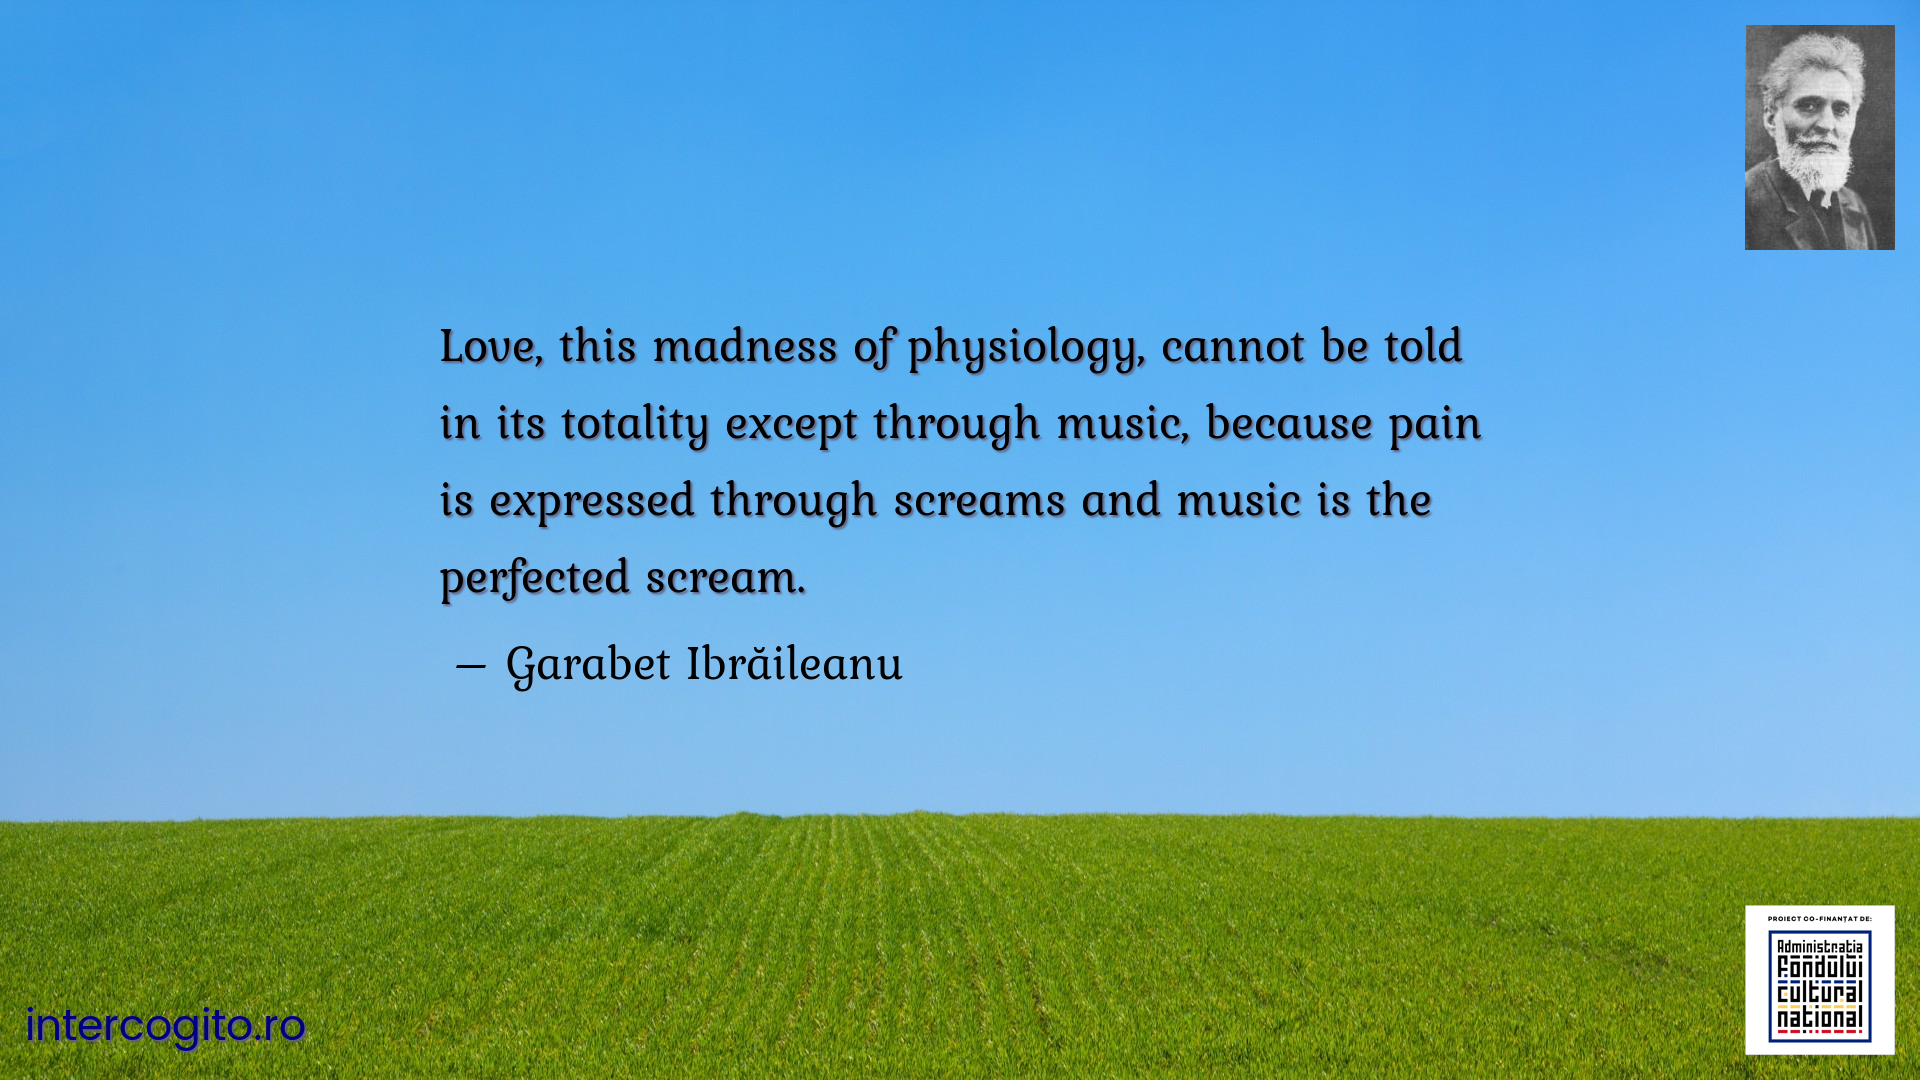 Love, this madness of physiology, cannot be told in its totality except through music, because pain is expressed through screams and music is the perfected scream.